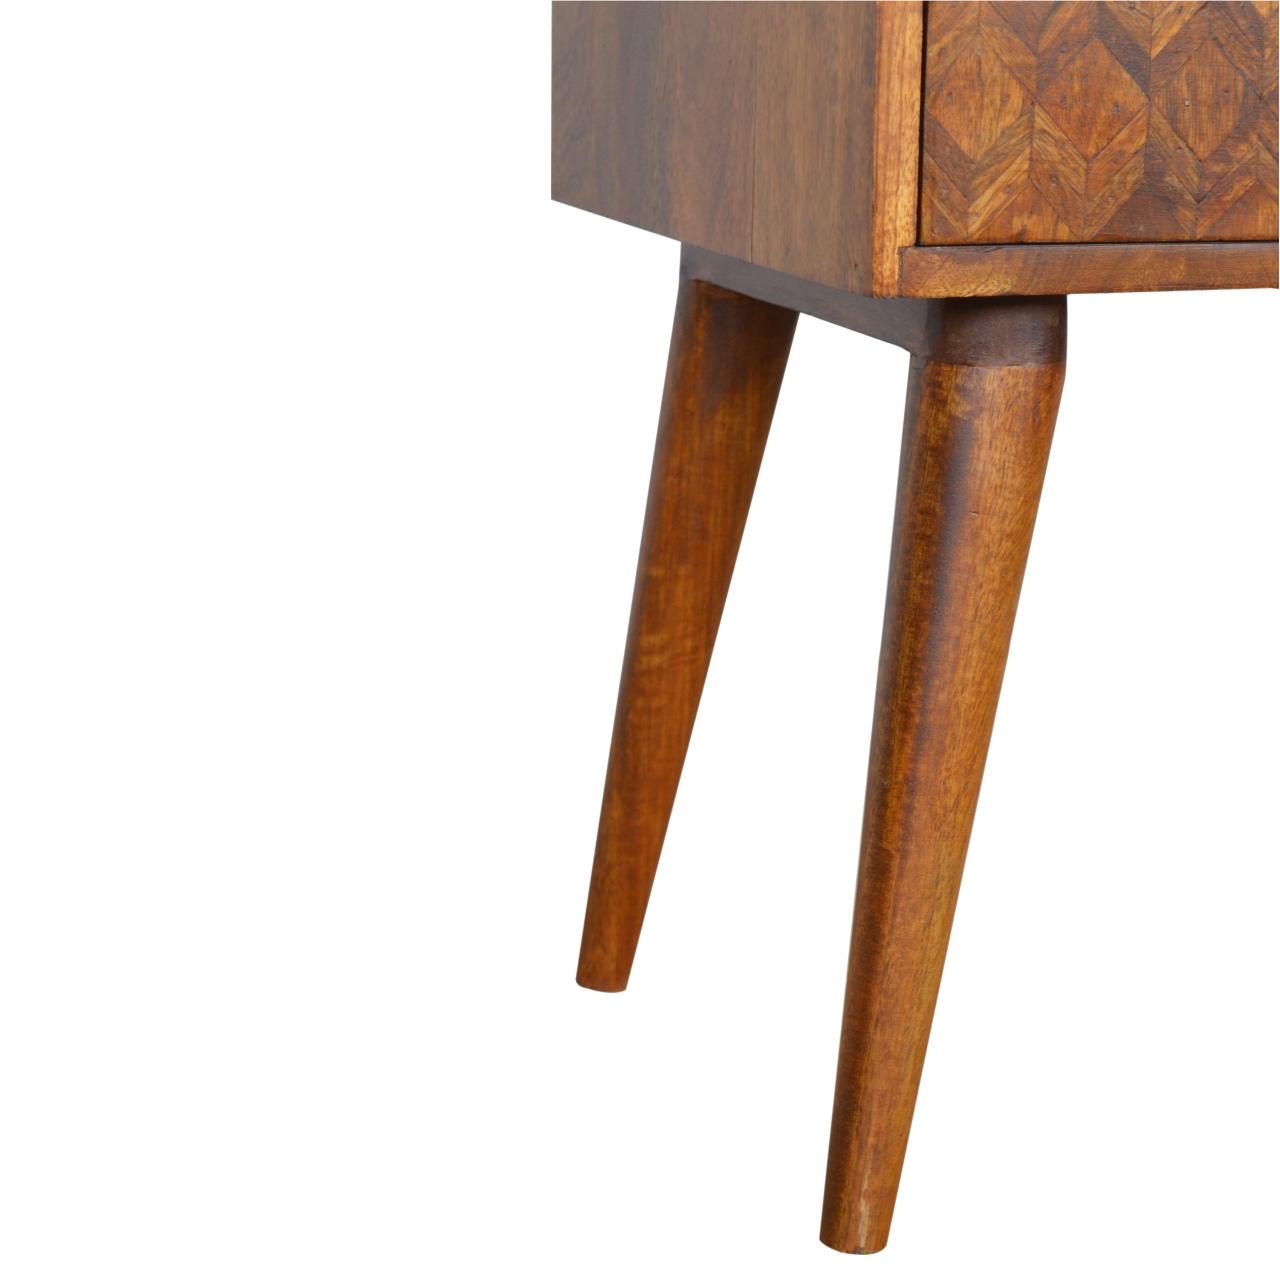 Assorted Chestnut Bedside with Open Slot